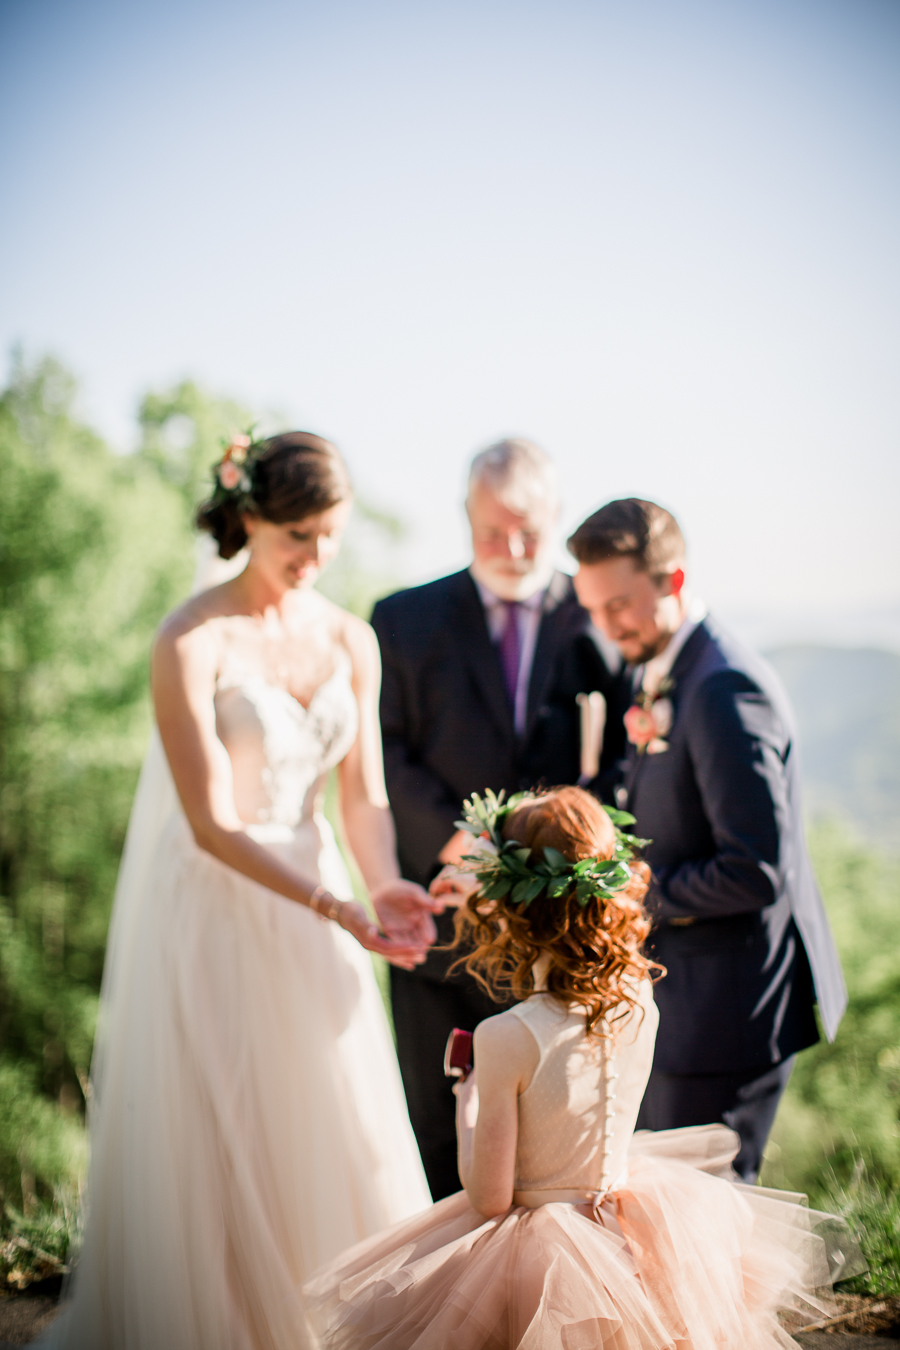 Flower Girl giving rings to Bride at this North Carolina Elopement by Knoxville Wedding Photographer, Amanda May Photos.